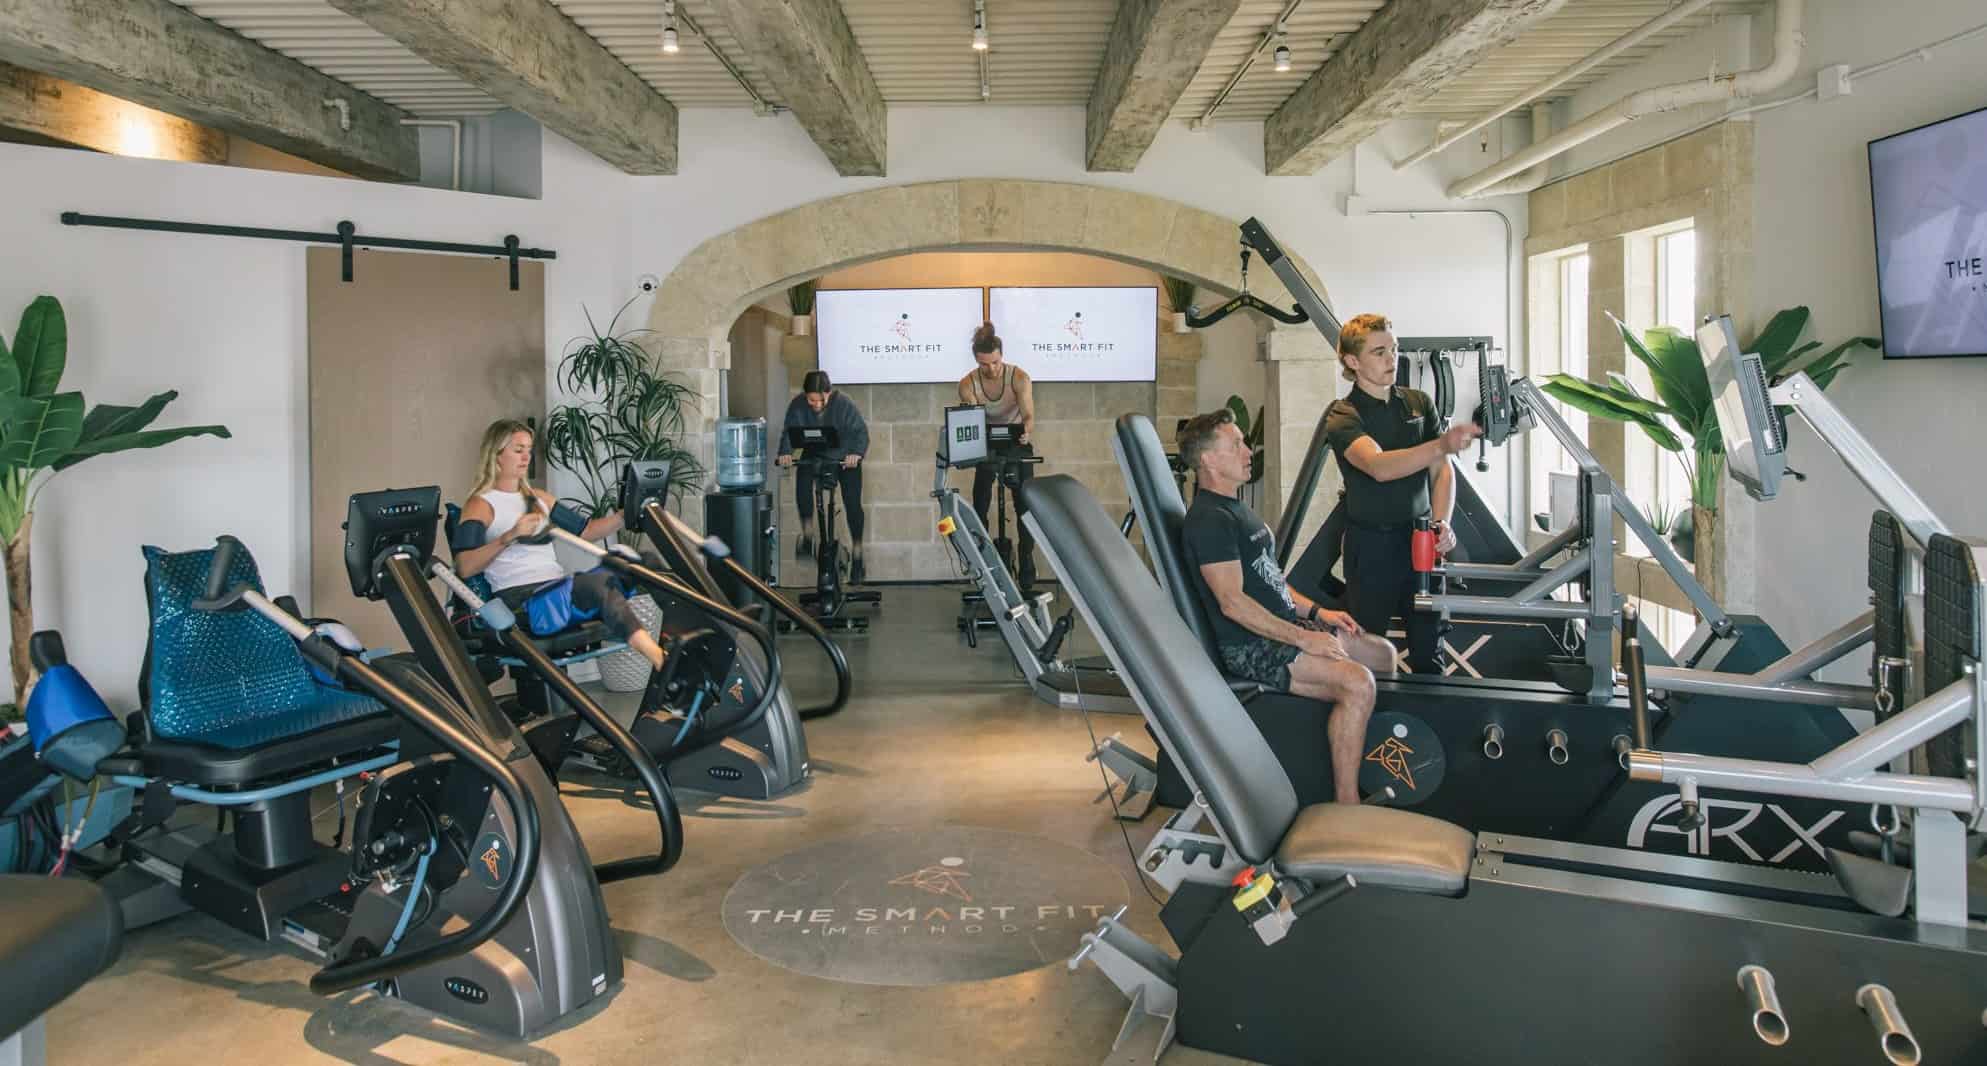 Home - The Smart Fit Method, Science-Based Fitness Gym